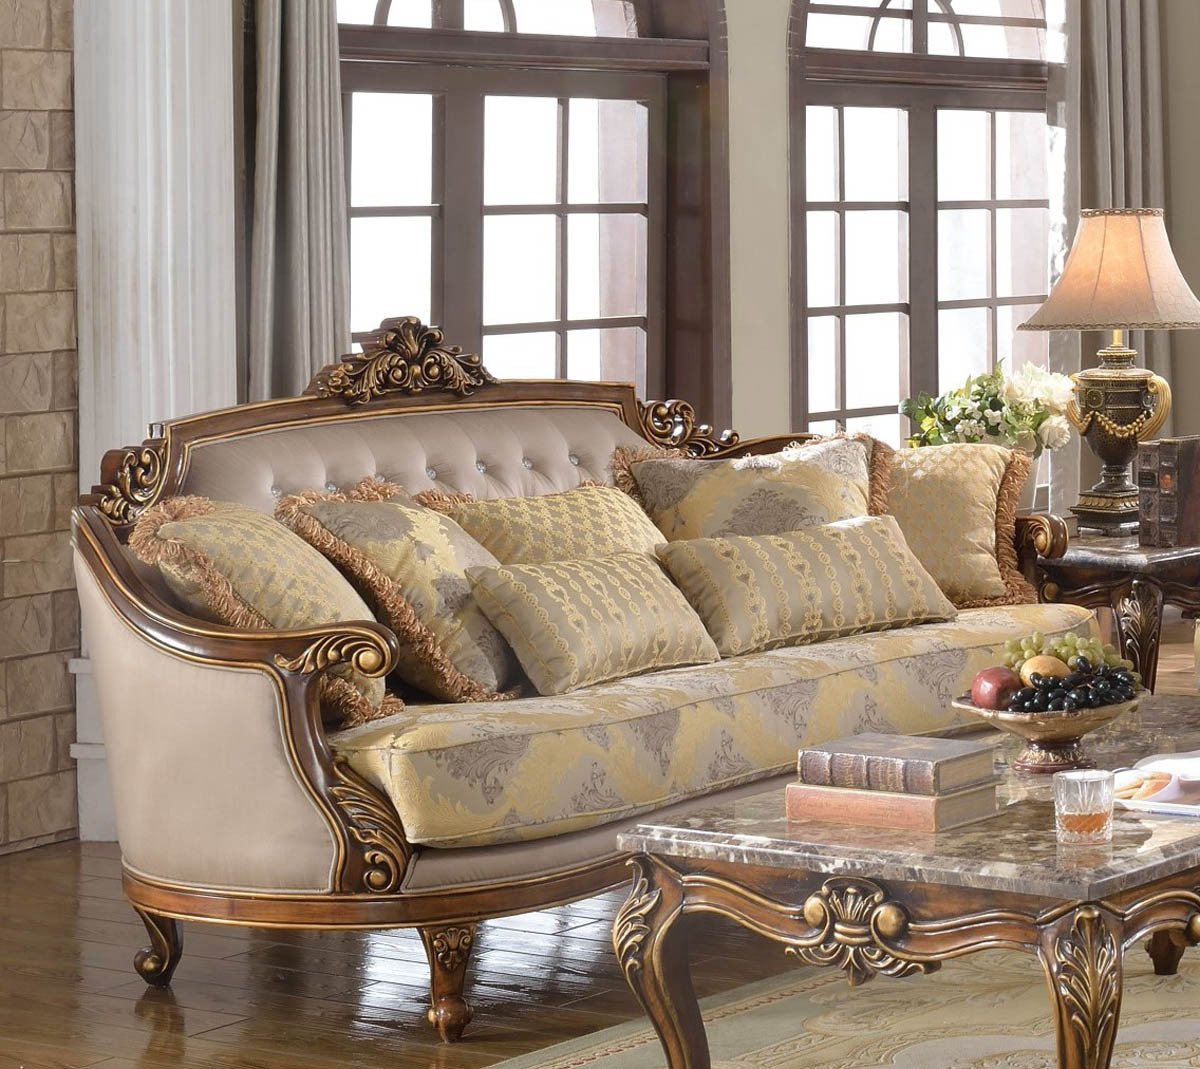 Comfortable Living Room Victorian Fontaine Traditional Living Room Set sofa Love Seat Chair